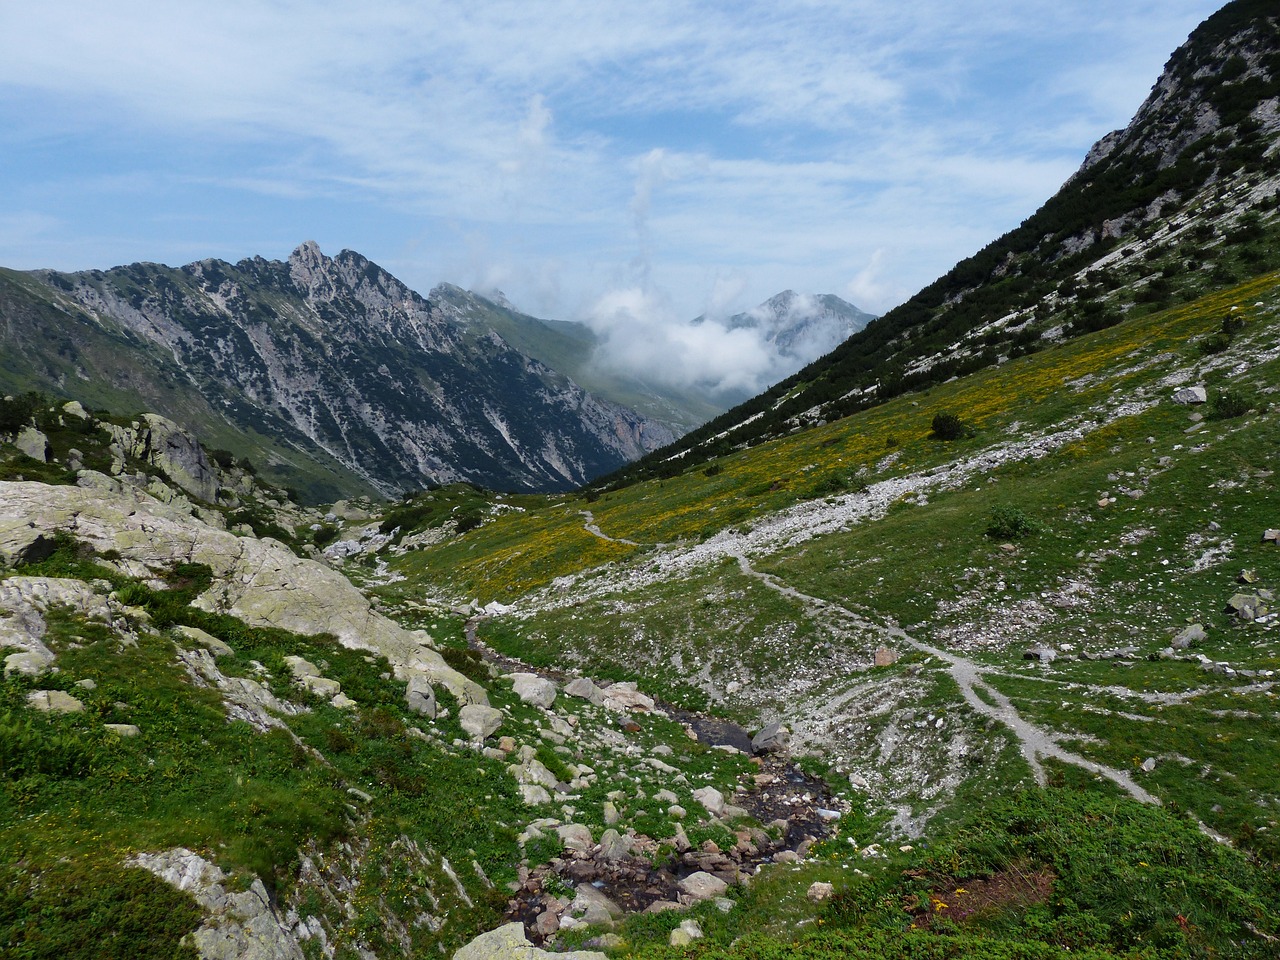 a small stream running through a lush green valley, a picture, pixabay, les nabis, mount olympus, upon the clouds, hiking in rocky mountain, garis edelweiss